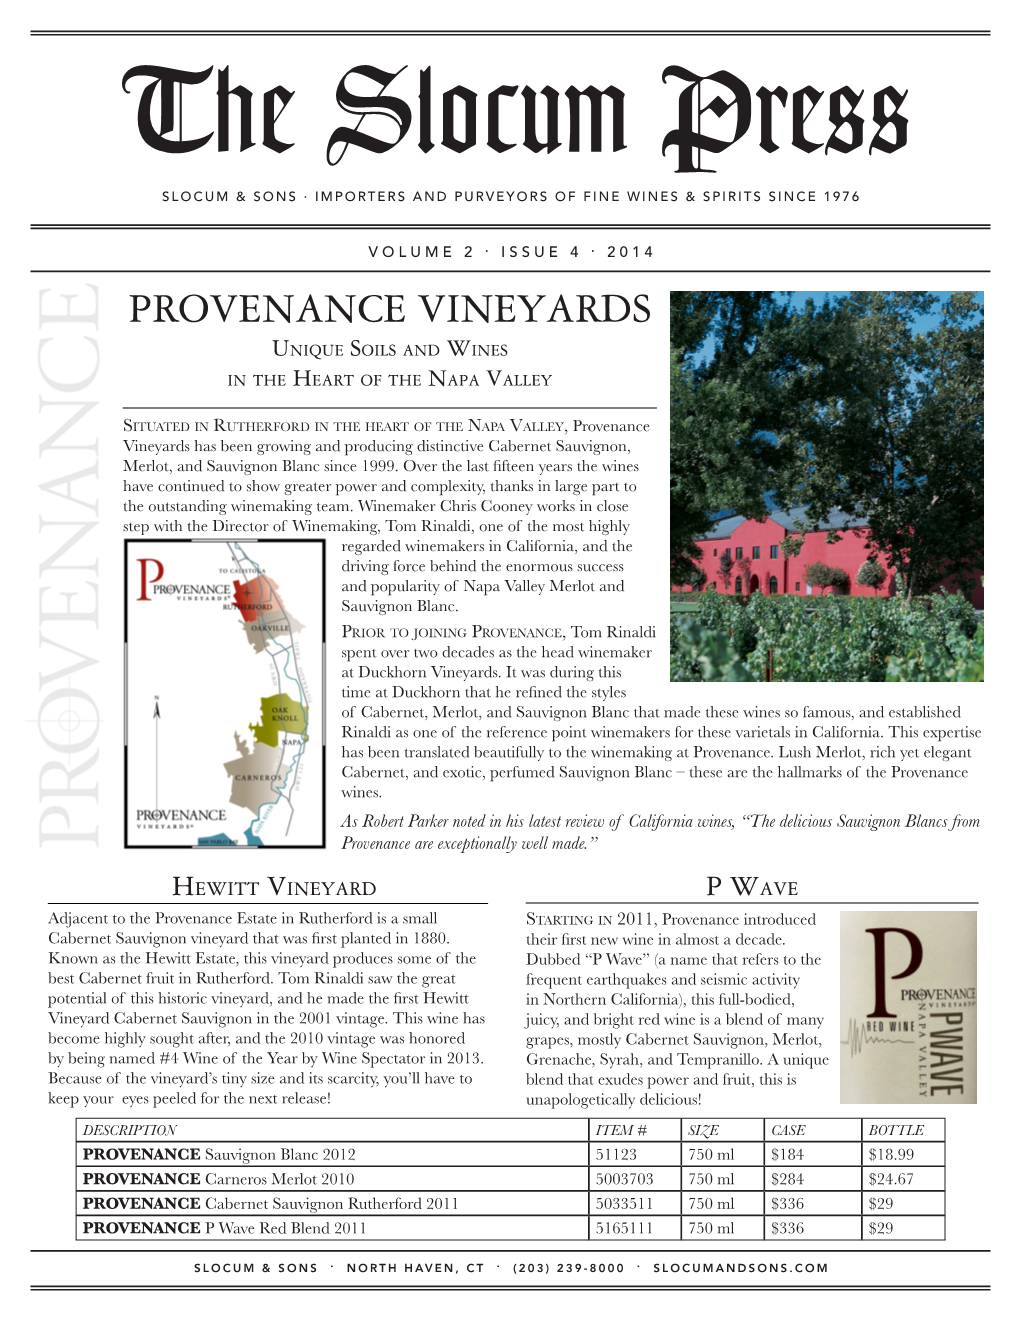 PROVENANCE VINEYARDS Unique Soils and Wines in the Heart of the Napa Valley